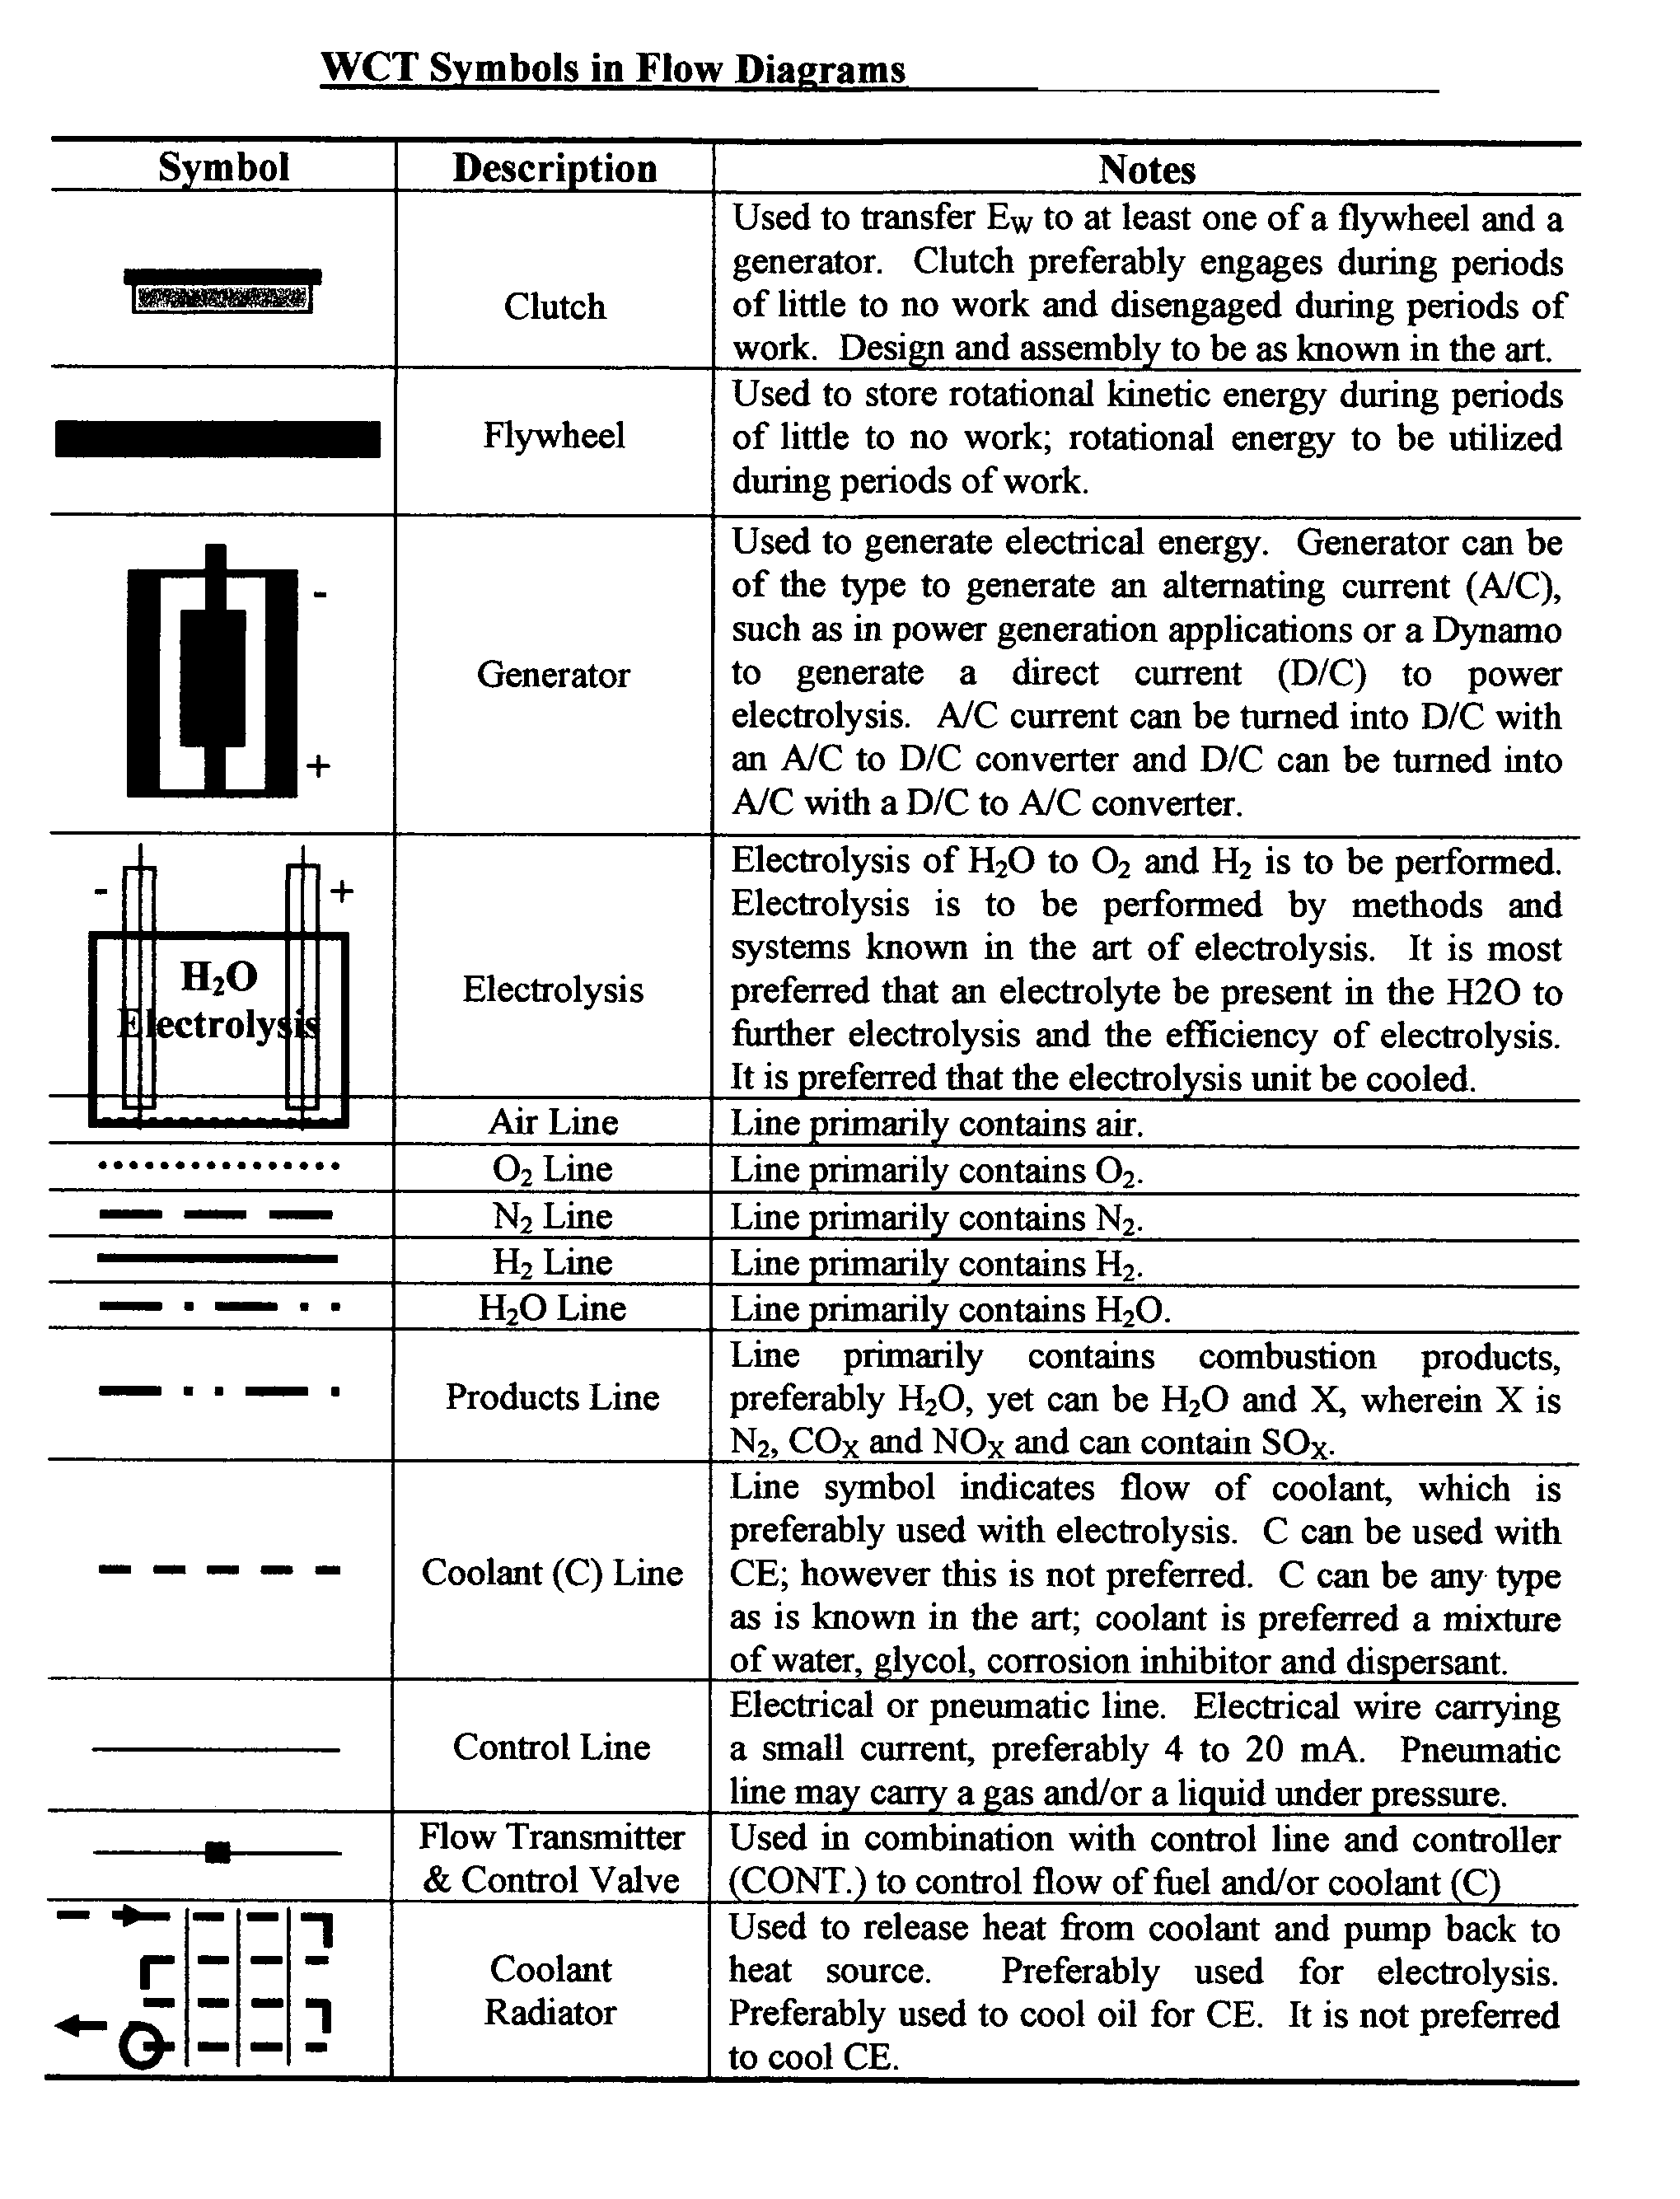 Water combustion technology - methods, processes, systems and apparatus for the combustion of hydrogen and oxygen